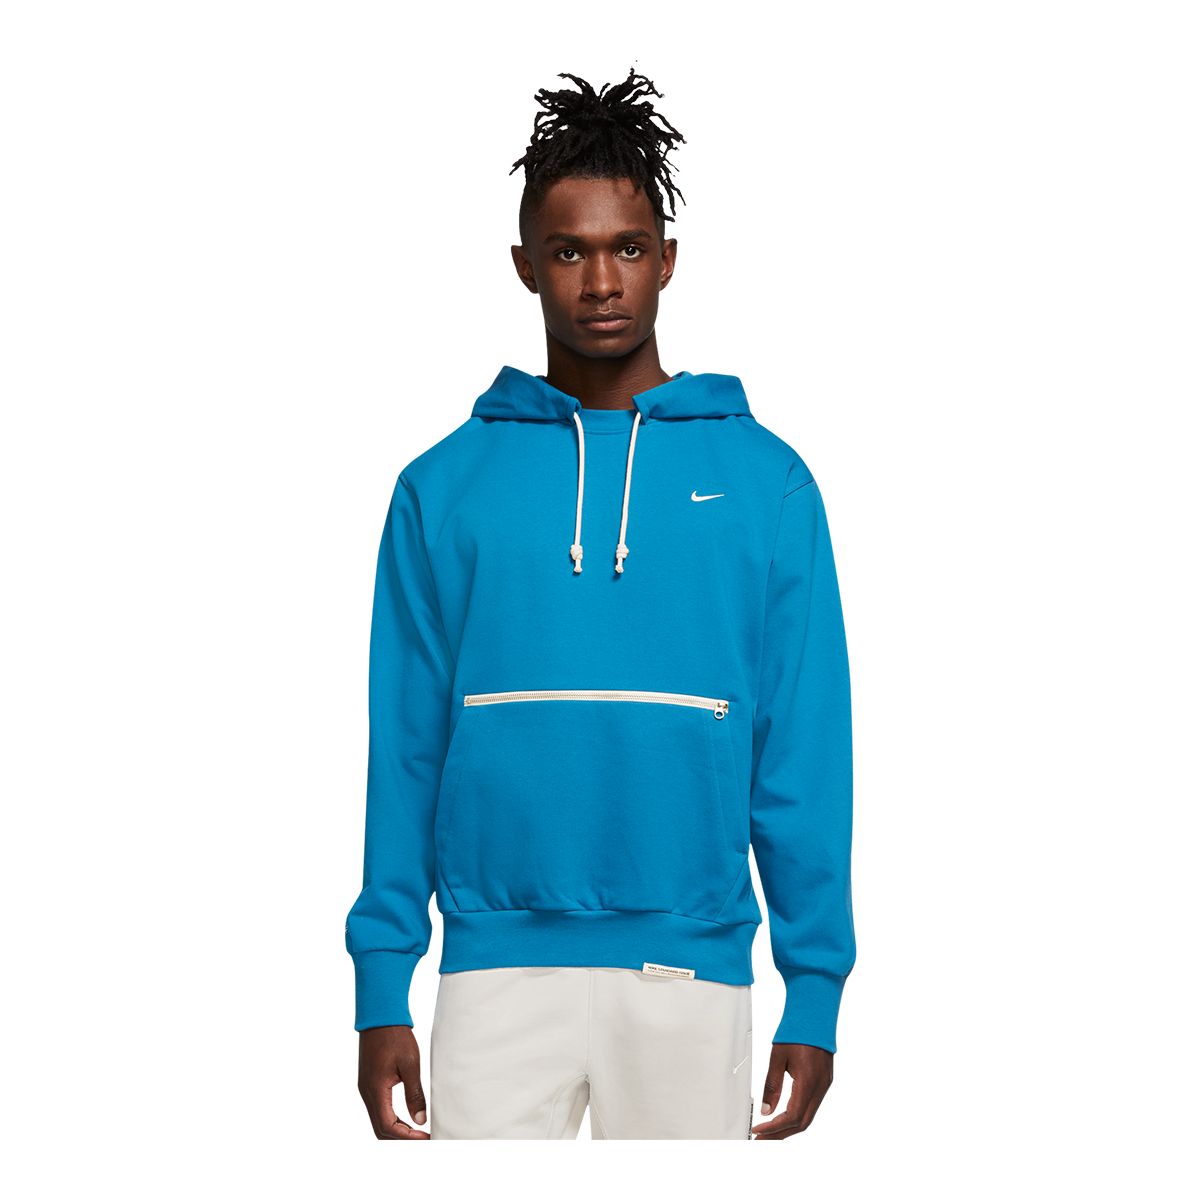 Nike Men's Standard Issue Pullover Hoodie, Midweight French Terry, Dri ...